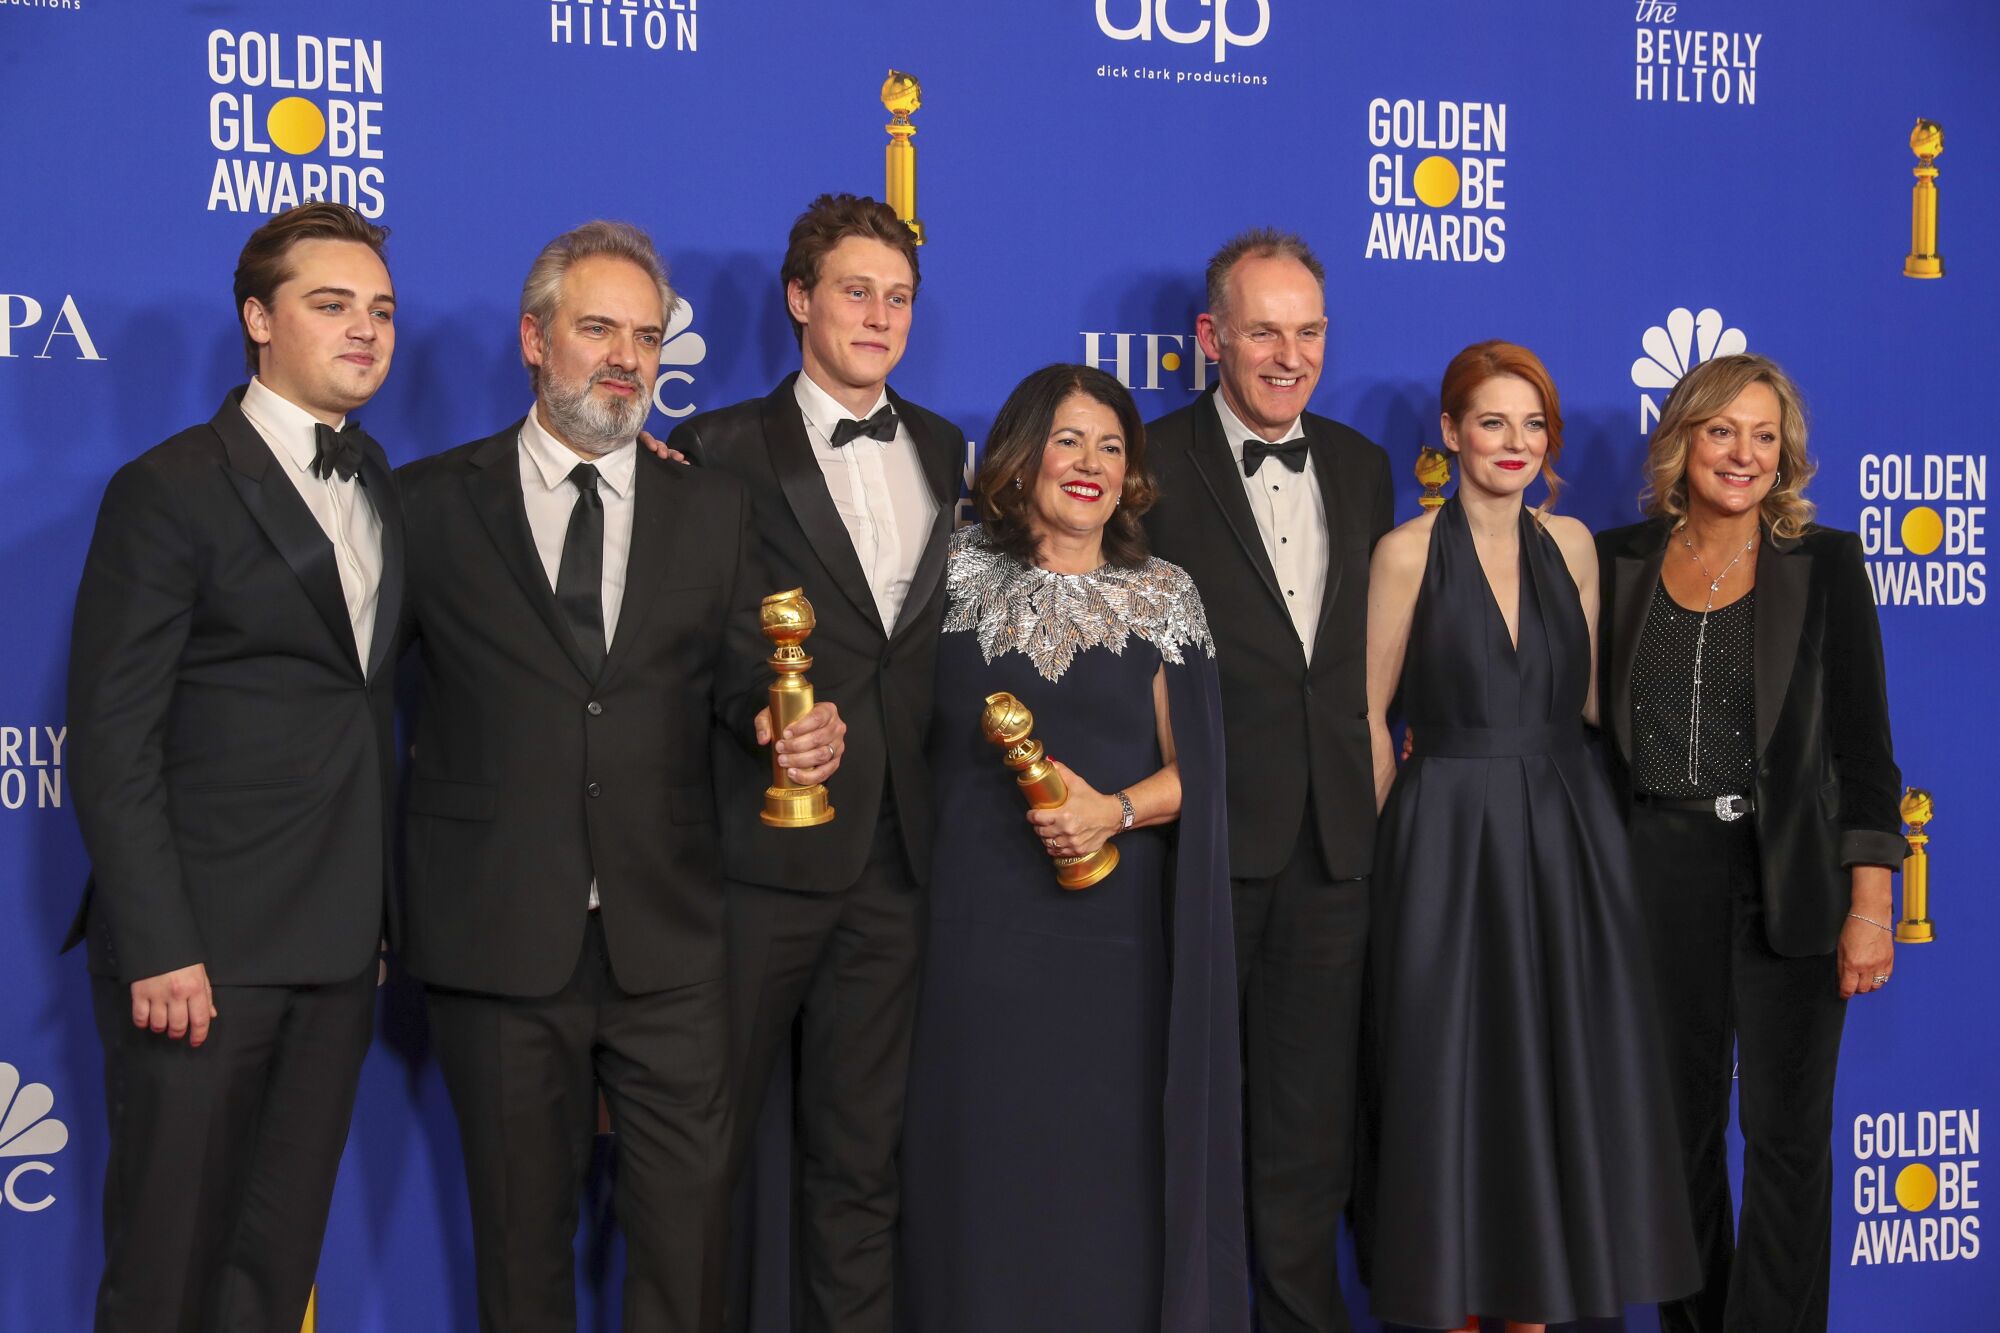 "1917" cast at the 77th Golden Globe Awards.